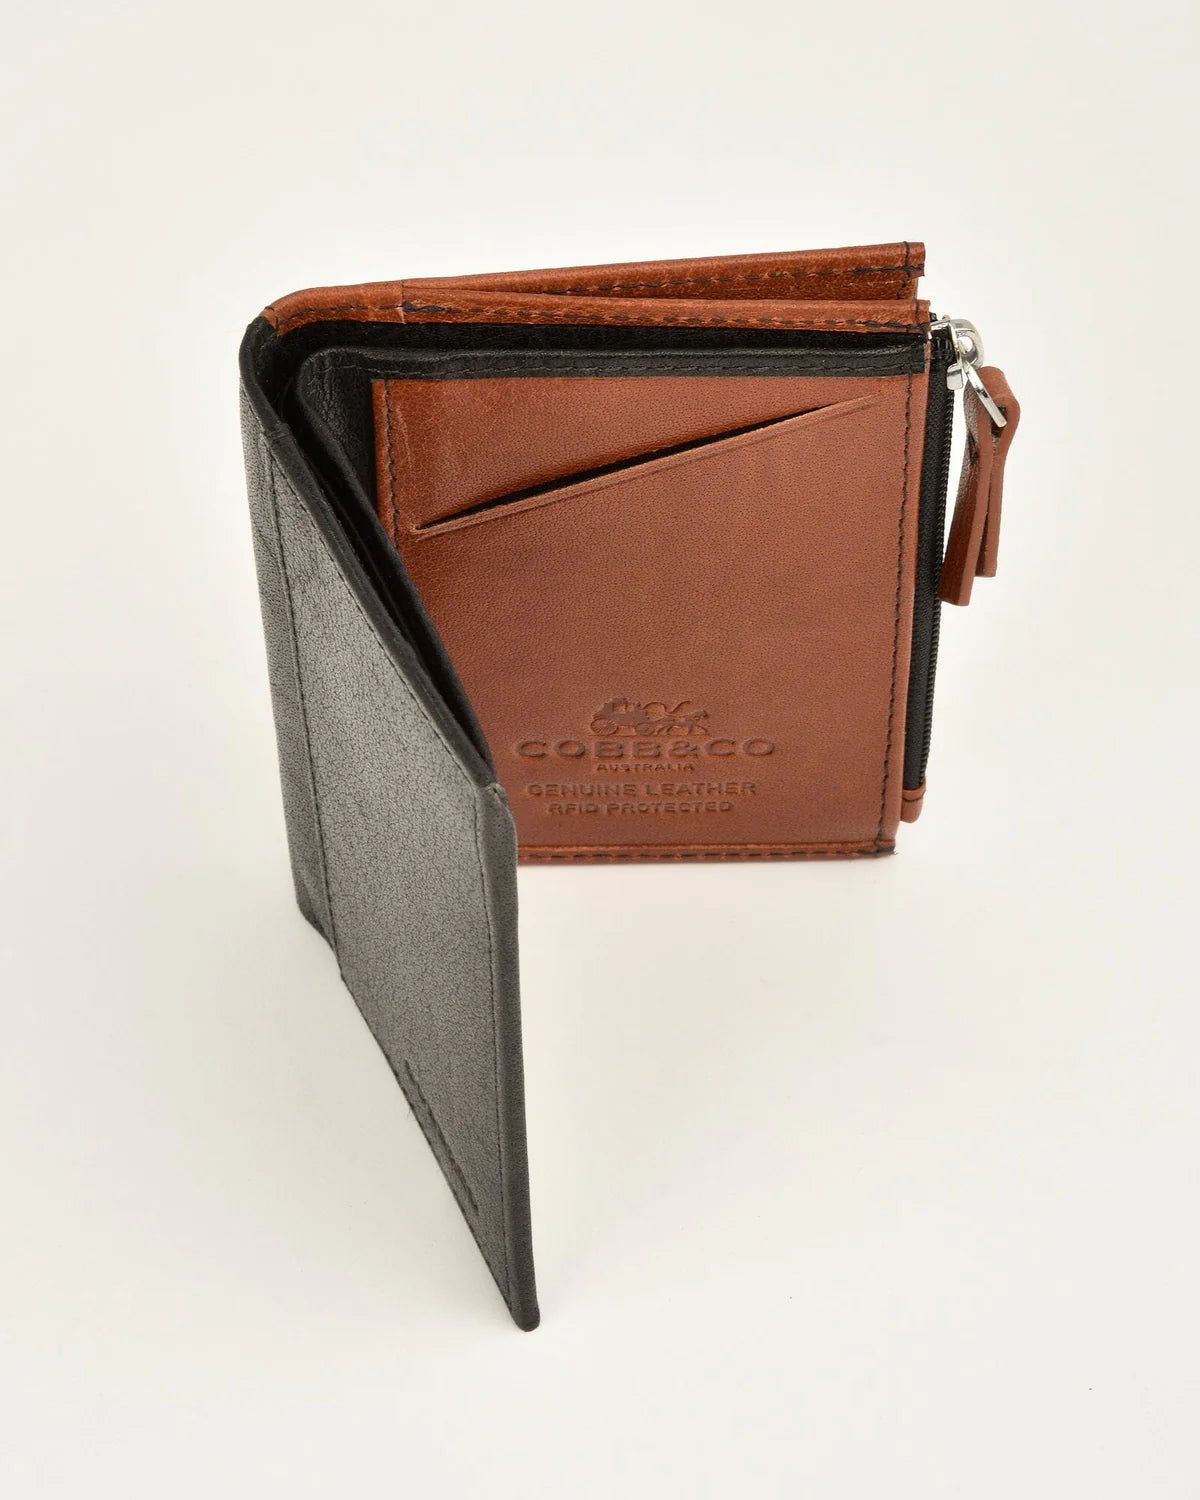 Gabee - Ridley RFID Leather Card Holder & Zipped Coin Pocket - rainbowbags